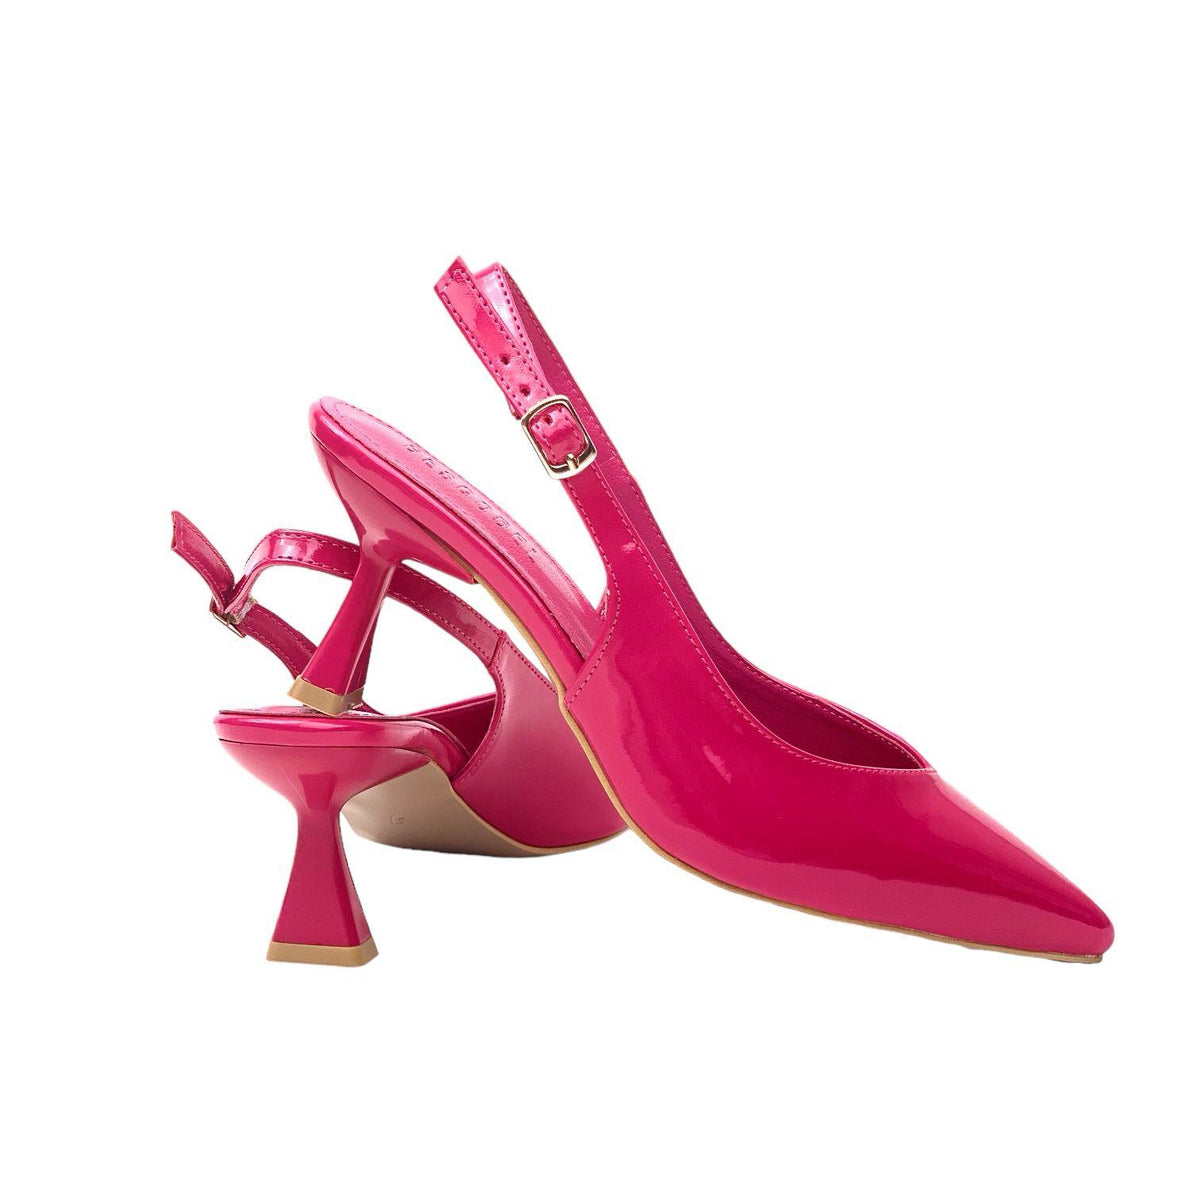 Women's Pasge Fuchsia Patent Leather Material Pointed Toe Heeled Sandals - STREETMODE™